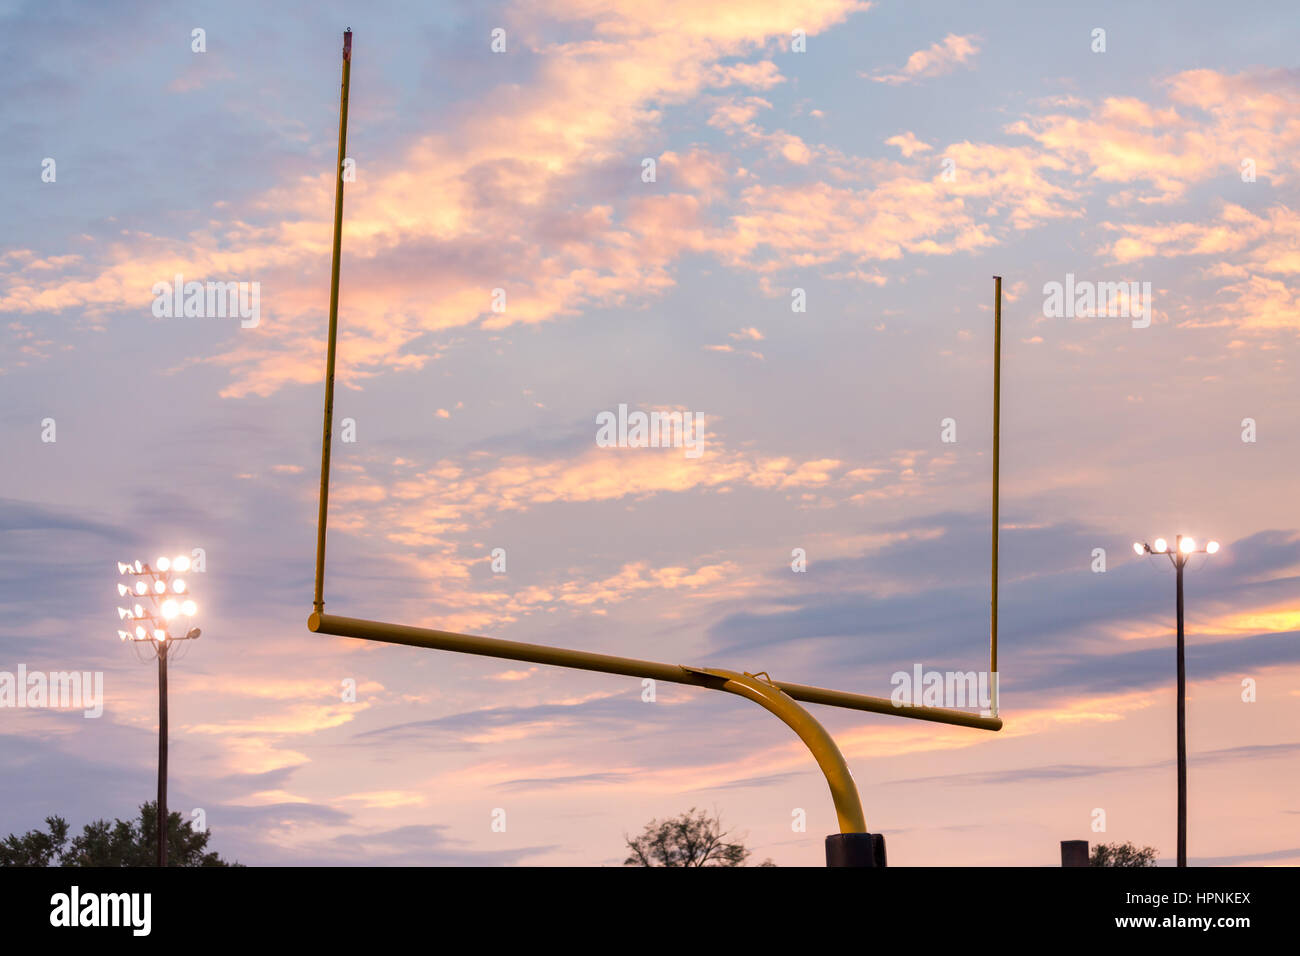 Yellow american football goal posts at school field against the lights and clouds of setting sun Stock Photo